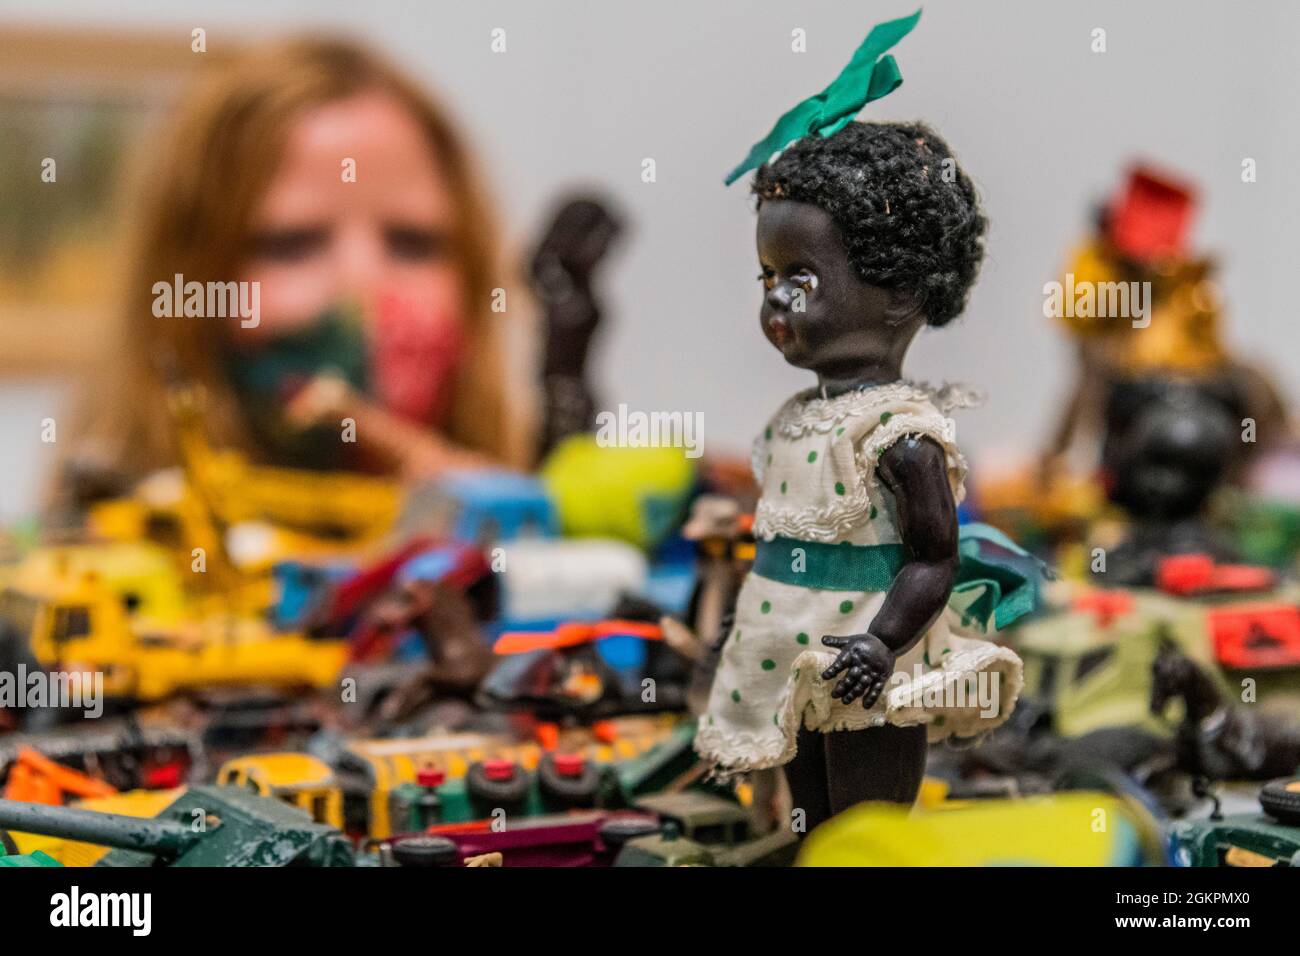 London, UK. 15th Sep, 2021. EXODUS, £43,200 die-cast collectable cars, antique dolls and mixed media, mounted steel frame on two Castrol drums, by Zak Ové - The Royal Academy (RA) Summer Exhibition 2021 co-ordinated by Yinka Shonibare RA. It explores the theme of ‘Reclaiming Magic' to celebrate the joy of creating art. It includes around 1400 works by emerging and established artists. Credit: Guy Bell/Alamy Live News Stock Photo